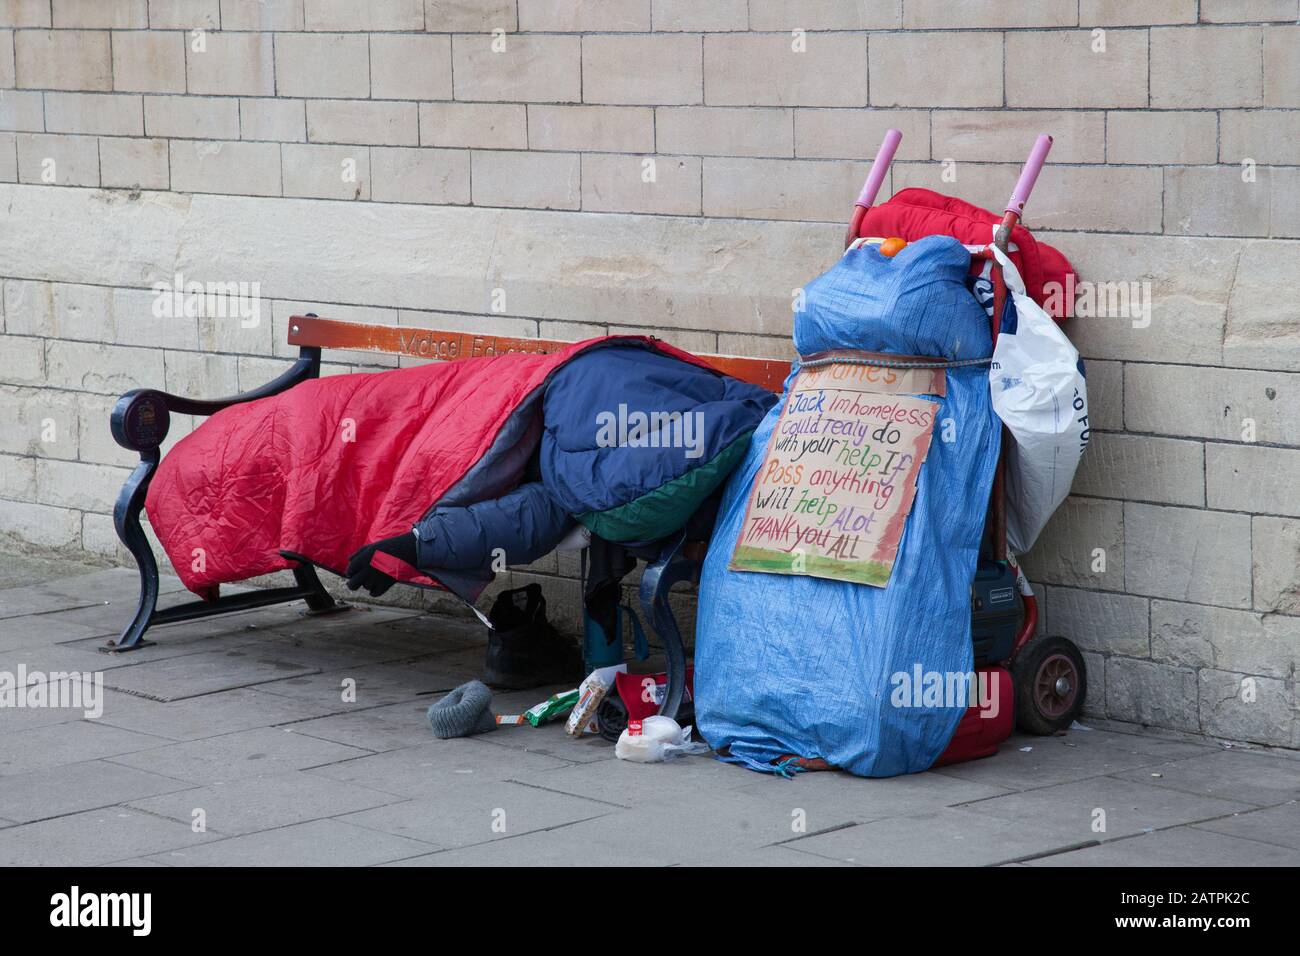 A homeless person in Oxford, UK Stock Photo